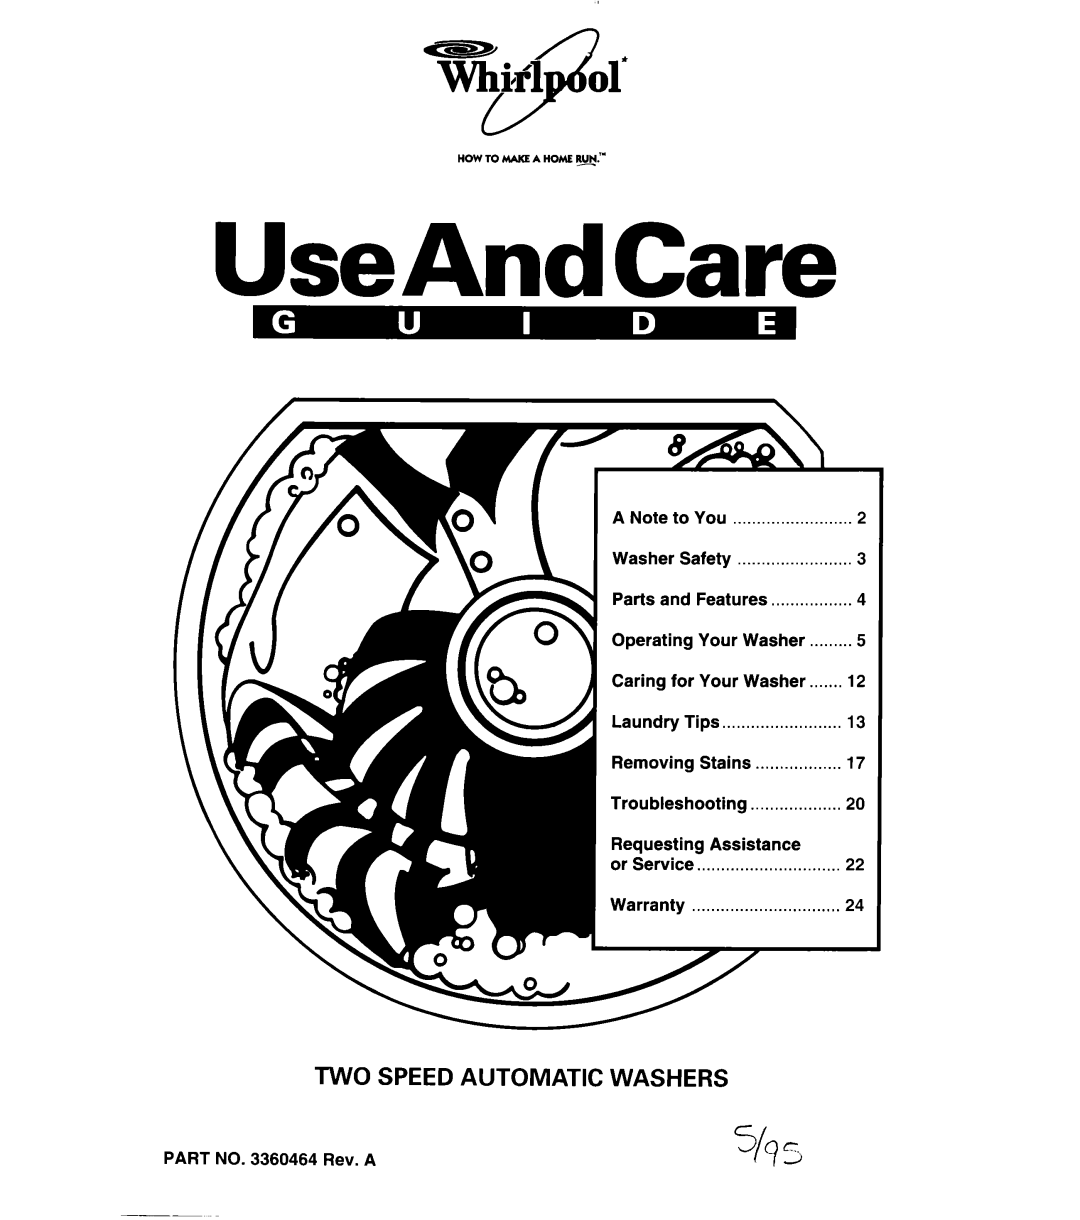 Whirlpool 3360464 warranty UseAndCare, Two Speed Automatic Washers 